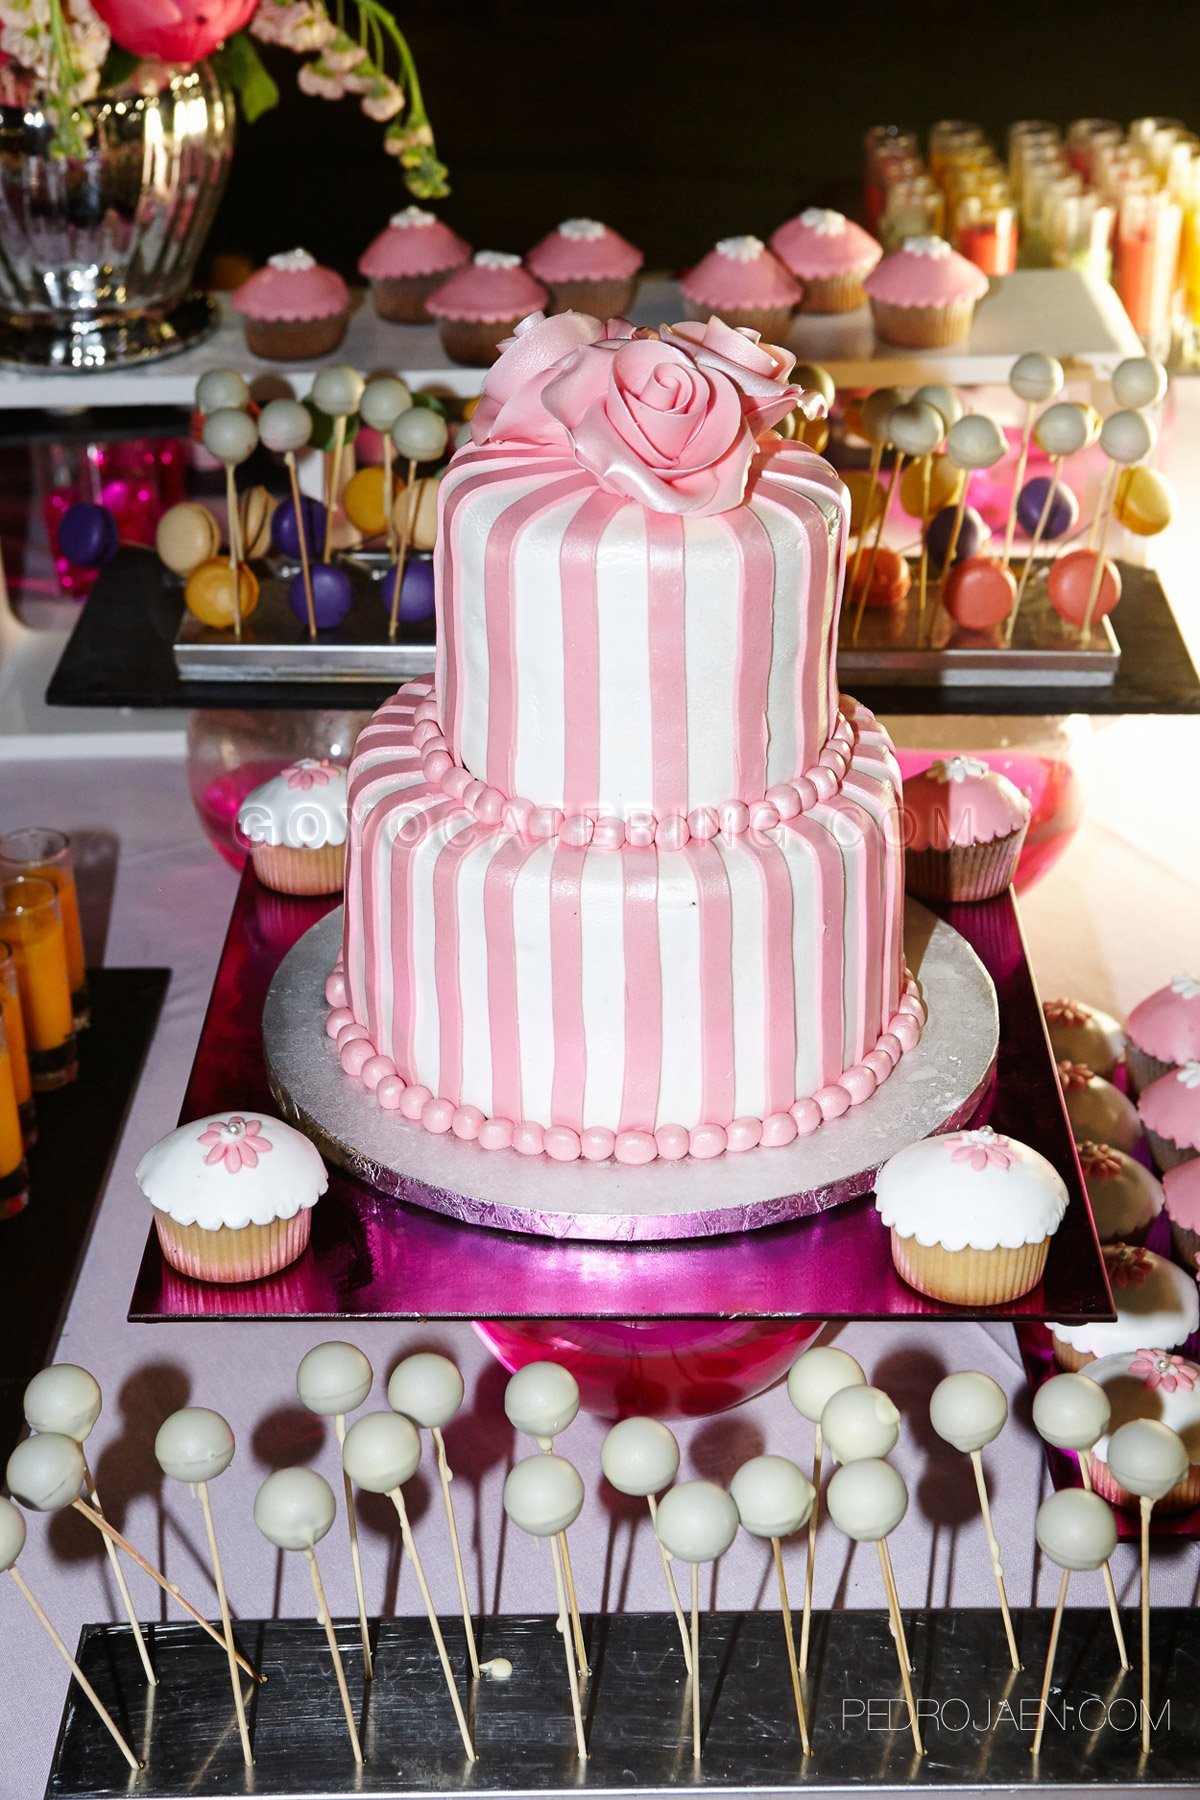 Celebration in pink at a wedding in Marbella